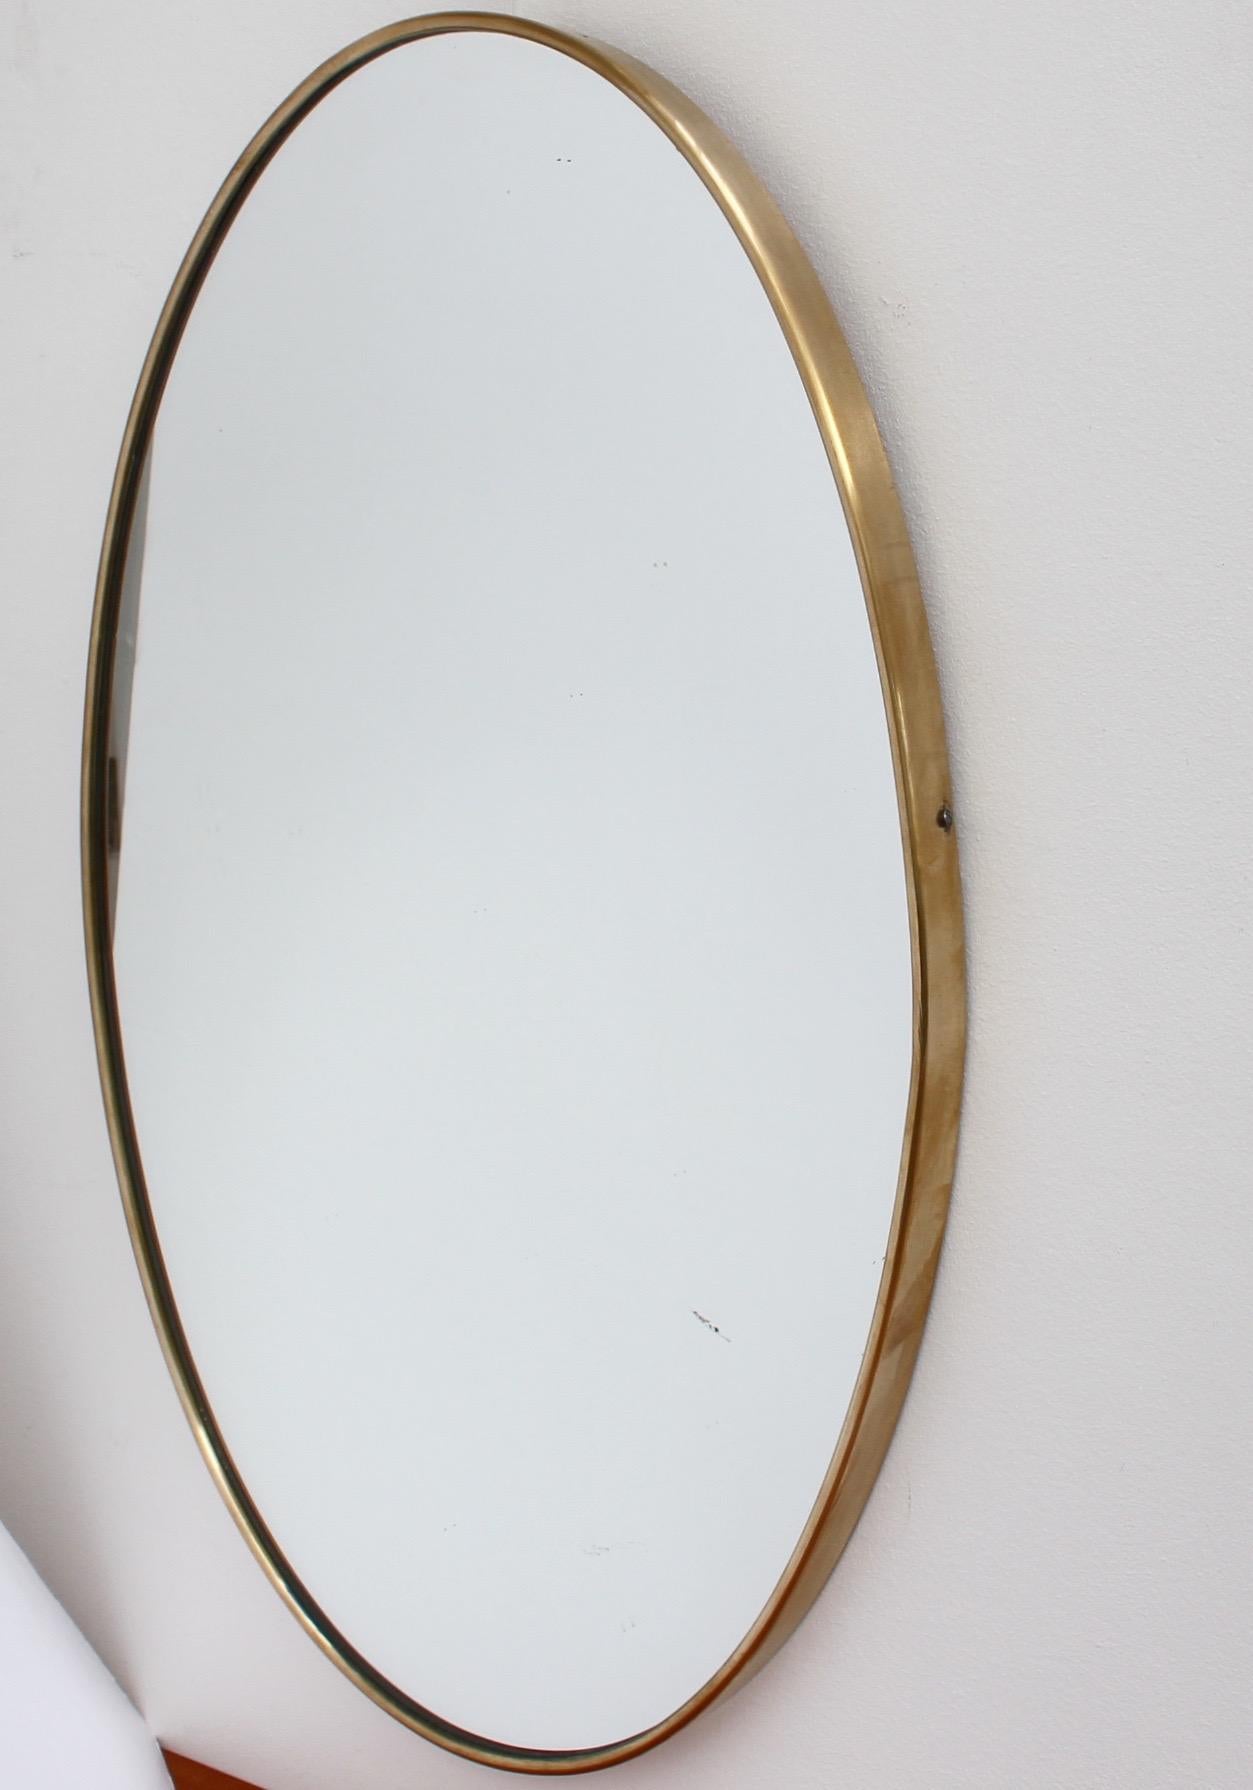 Midcentury Oval-Shaped Italian Wall Mirror with Brass Frame, 'circa 1950s' 2